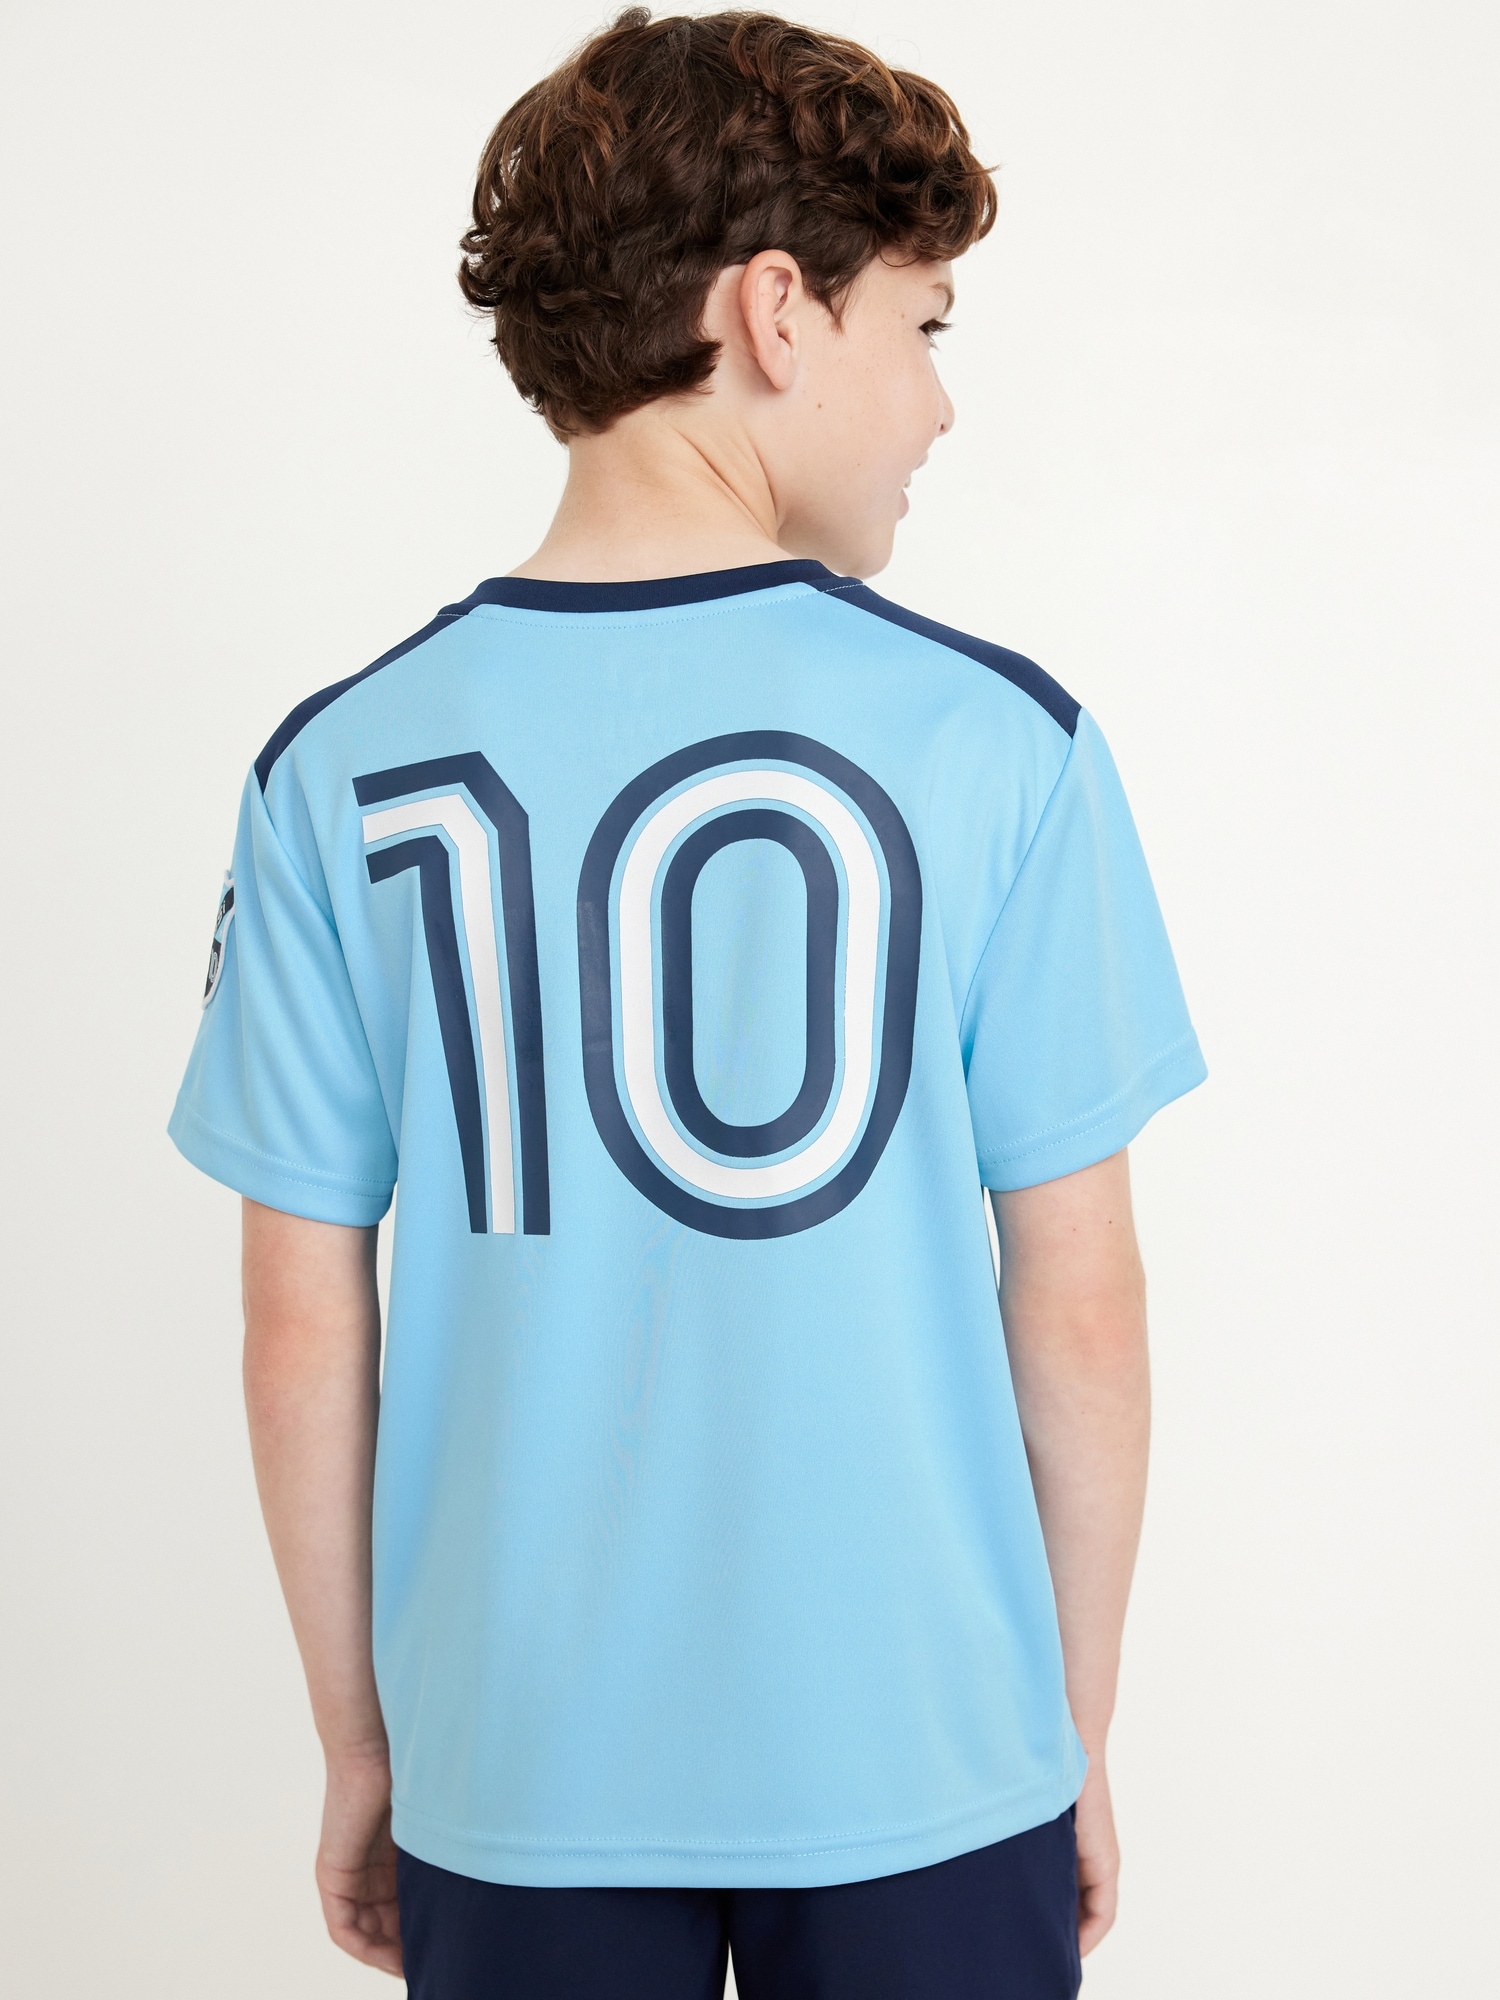 Messi™ Lifestyle Jersey T-Shirt for Boys